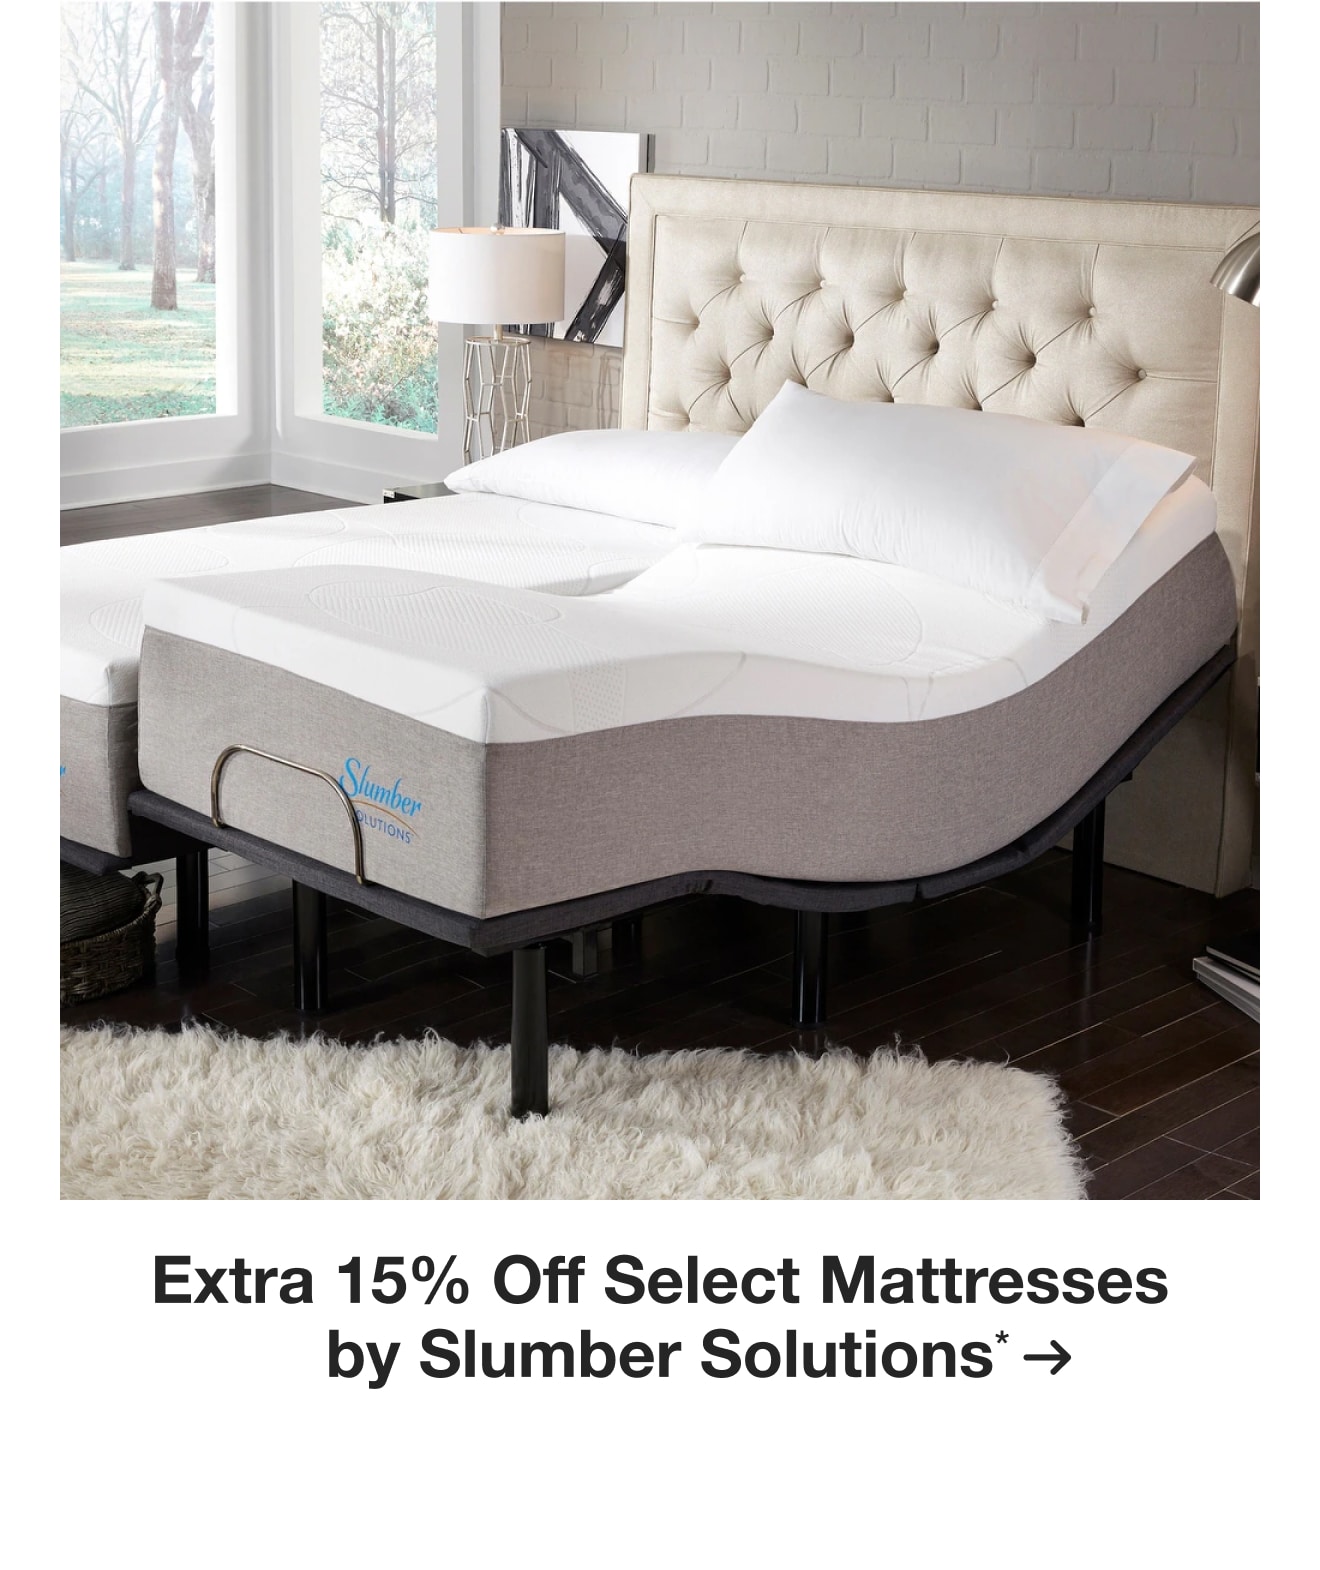 Extra 15% off Select Mattresses by Slumber Solutions*